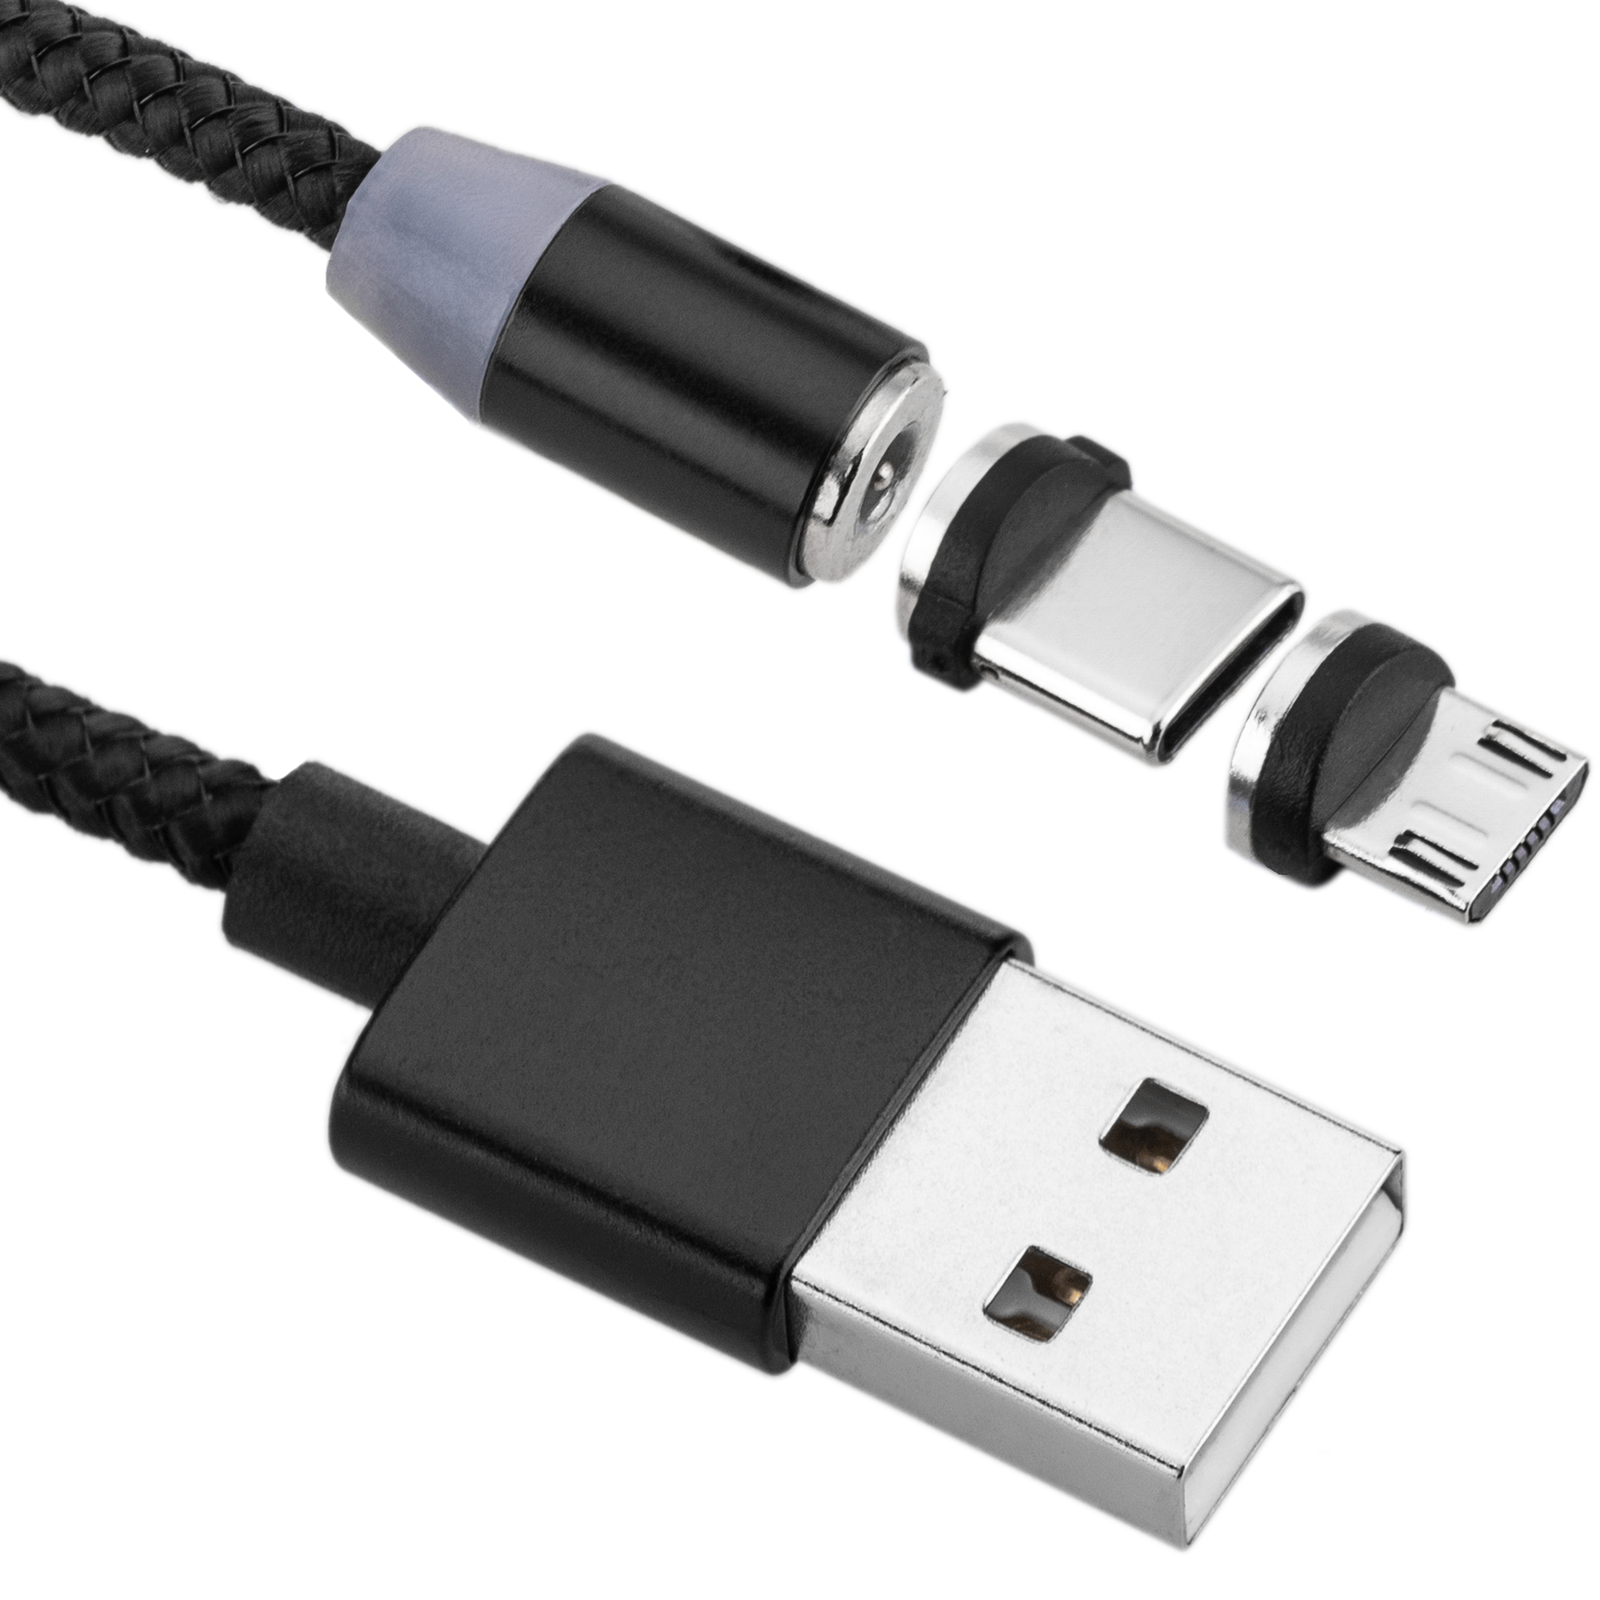 CABLE 2-IN-1 MICRO USB TO USB C 1M - Blanca — Cover company